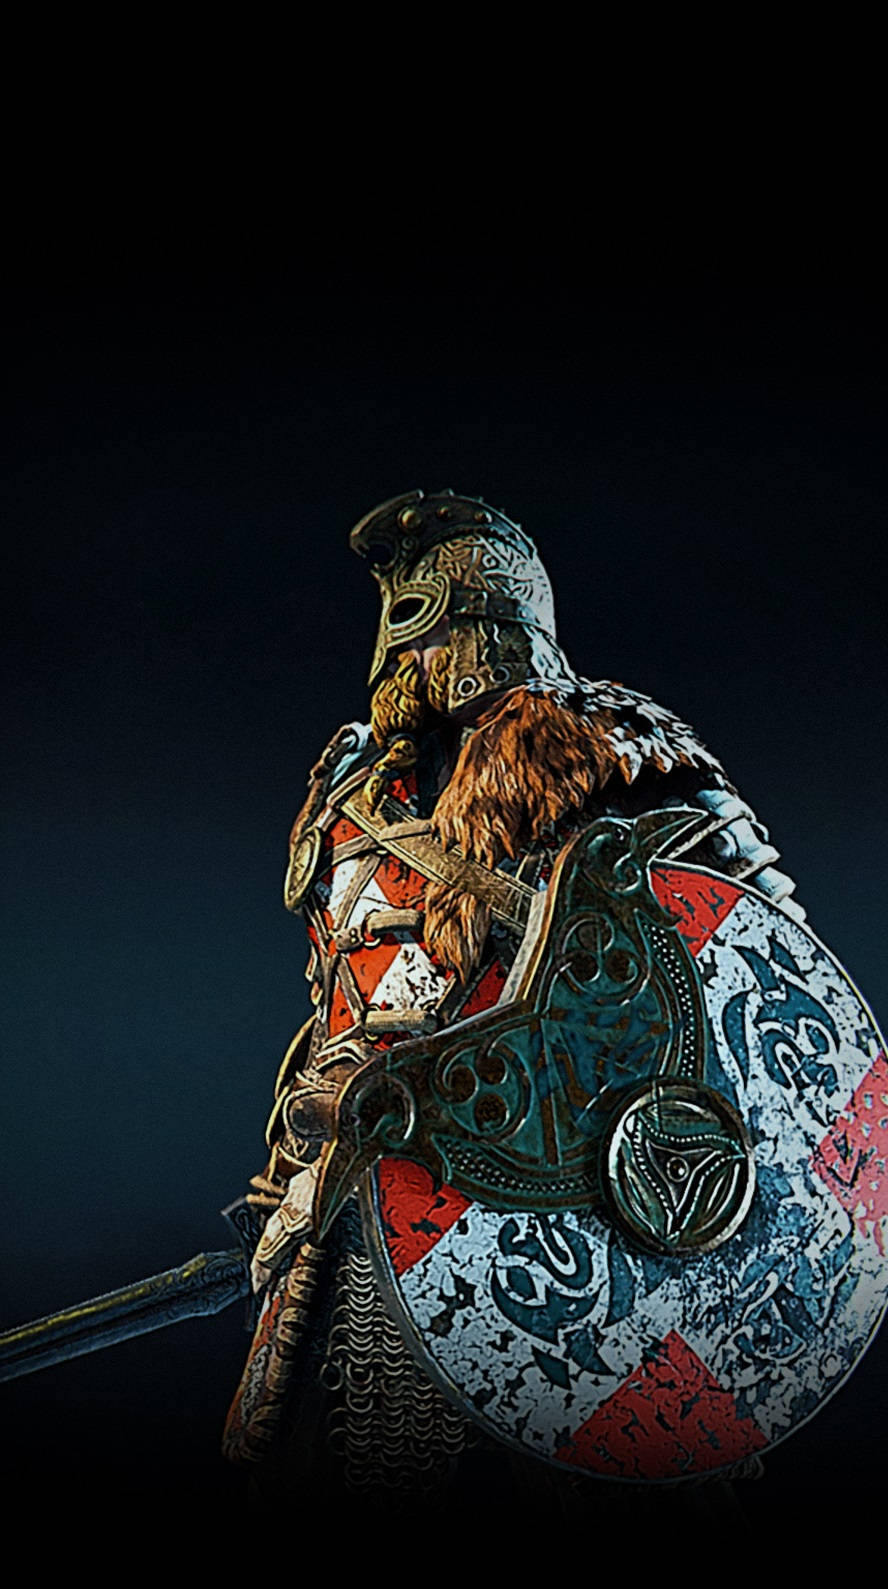 Epic Warlord - For Honor Phone Wallpaper Wallpaper